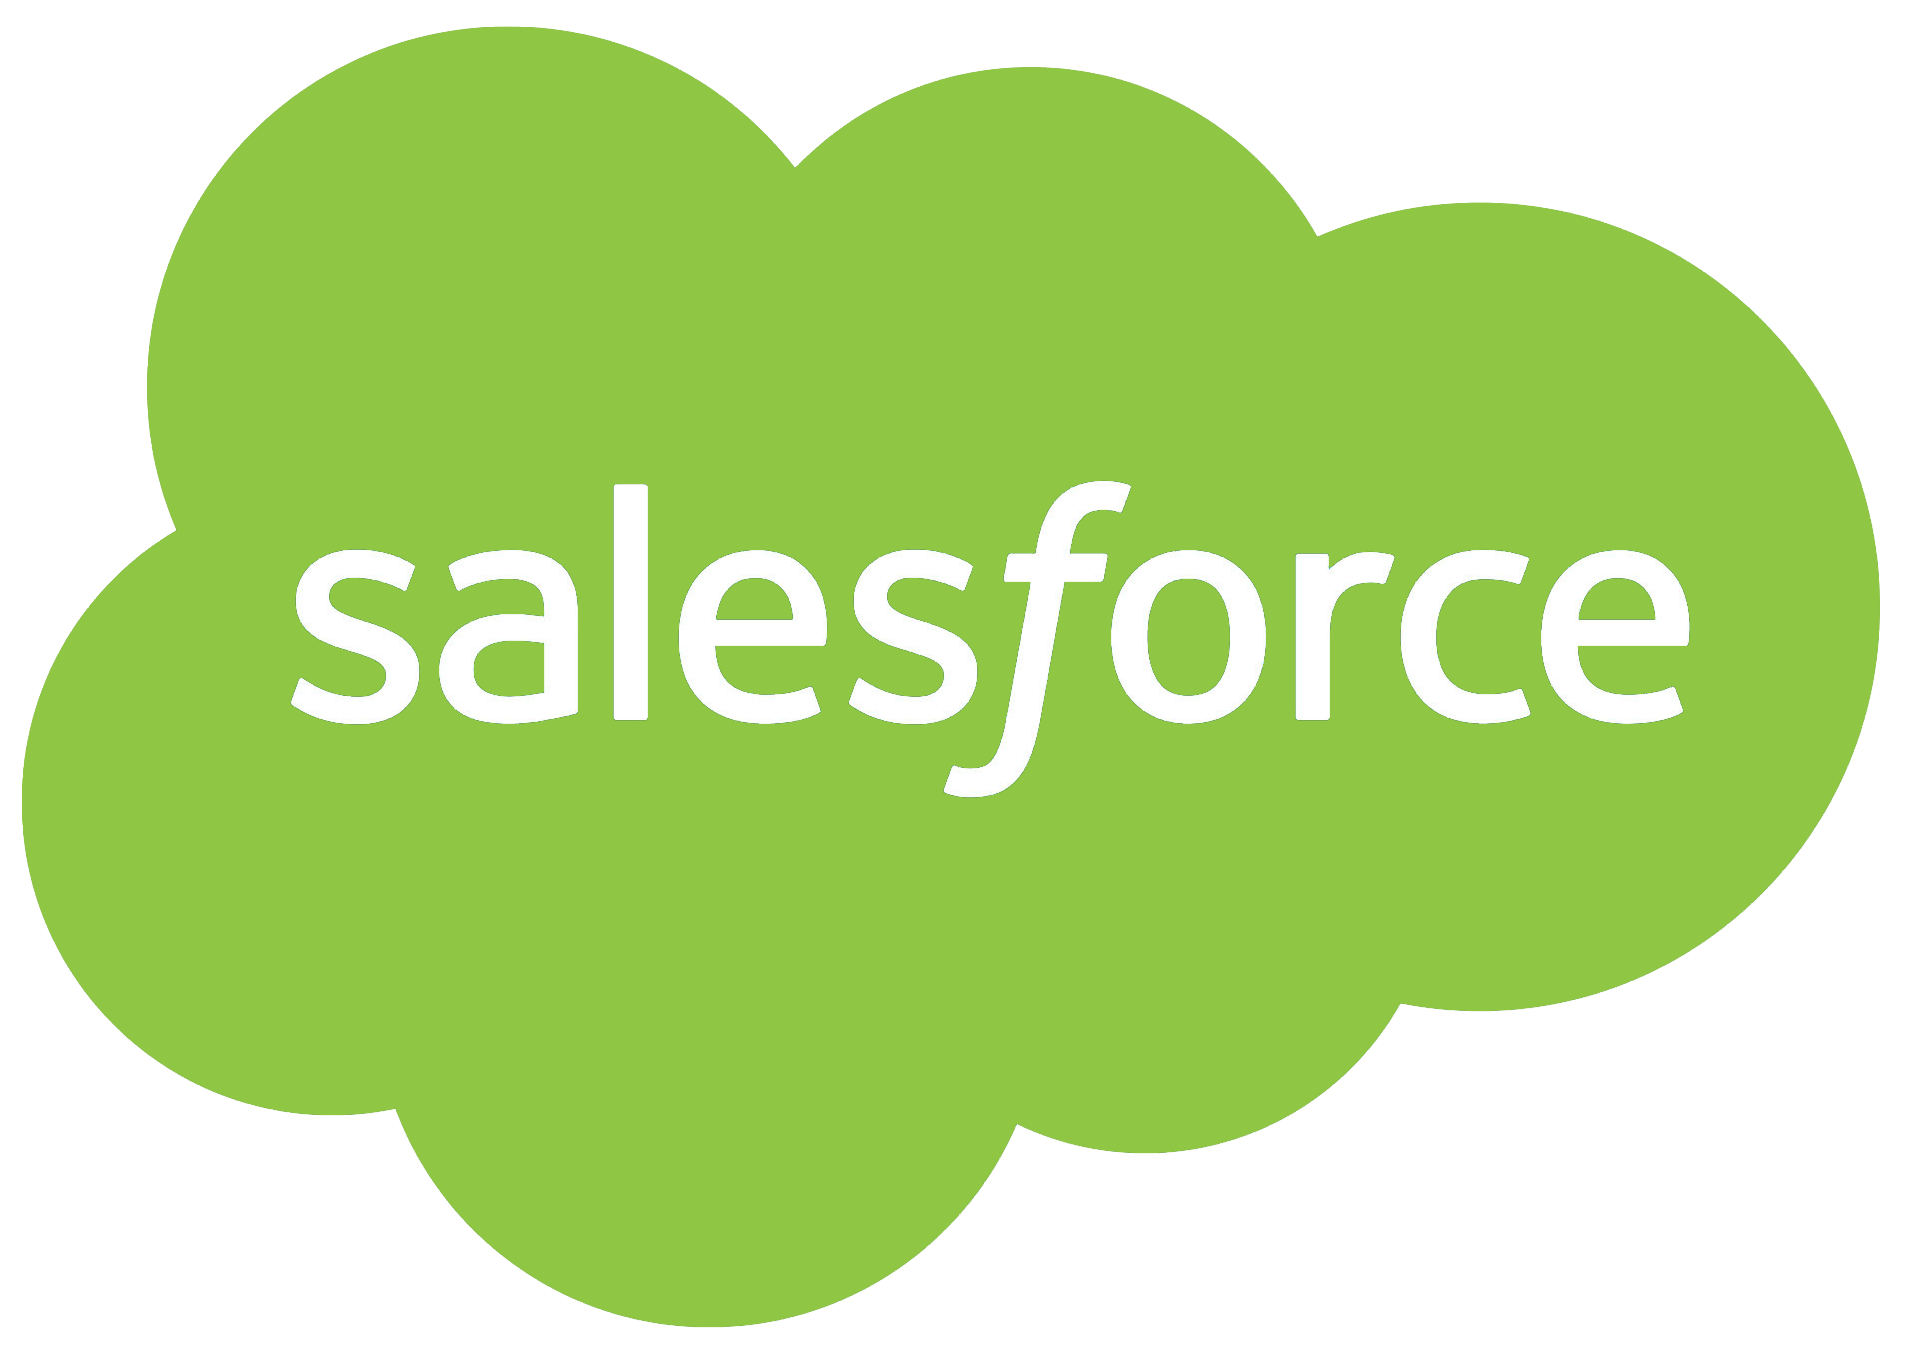 sales force text